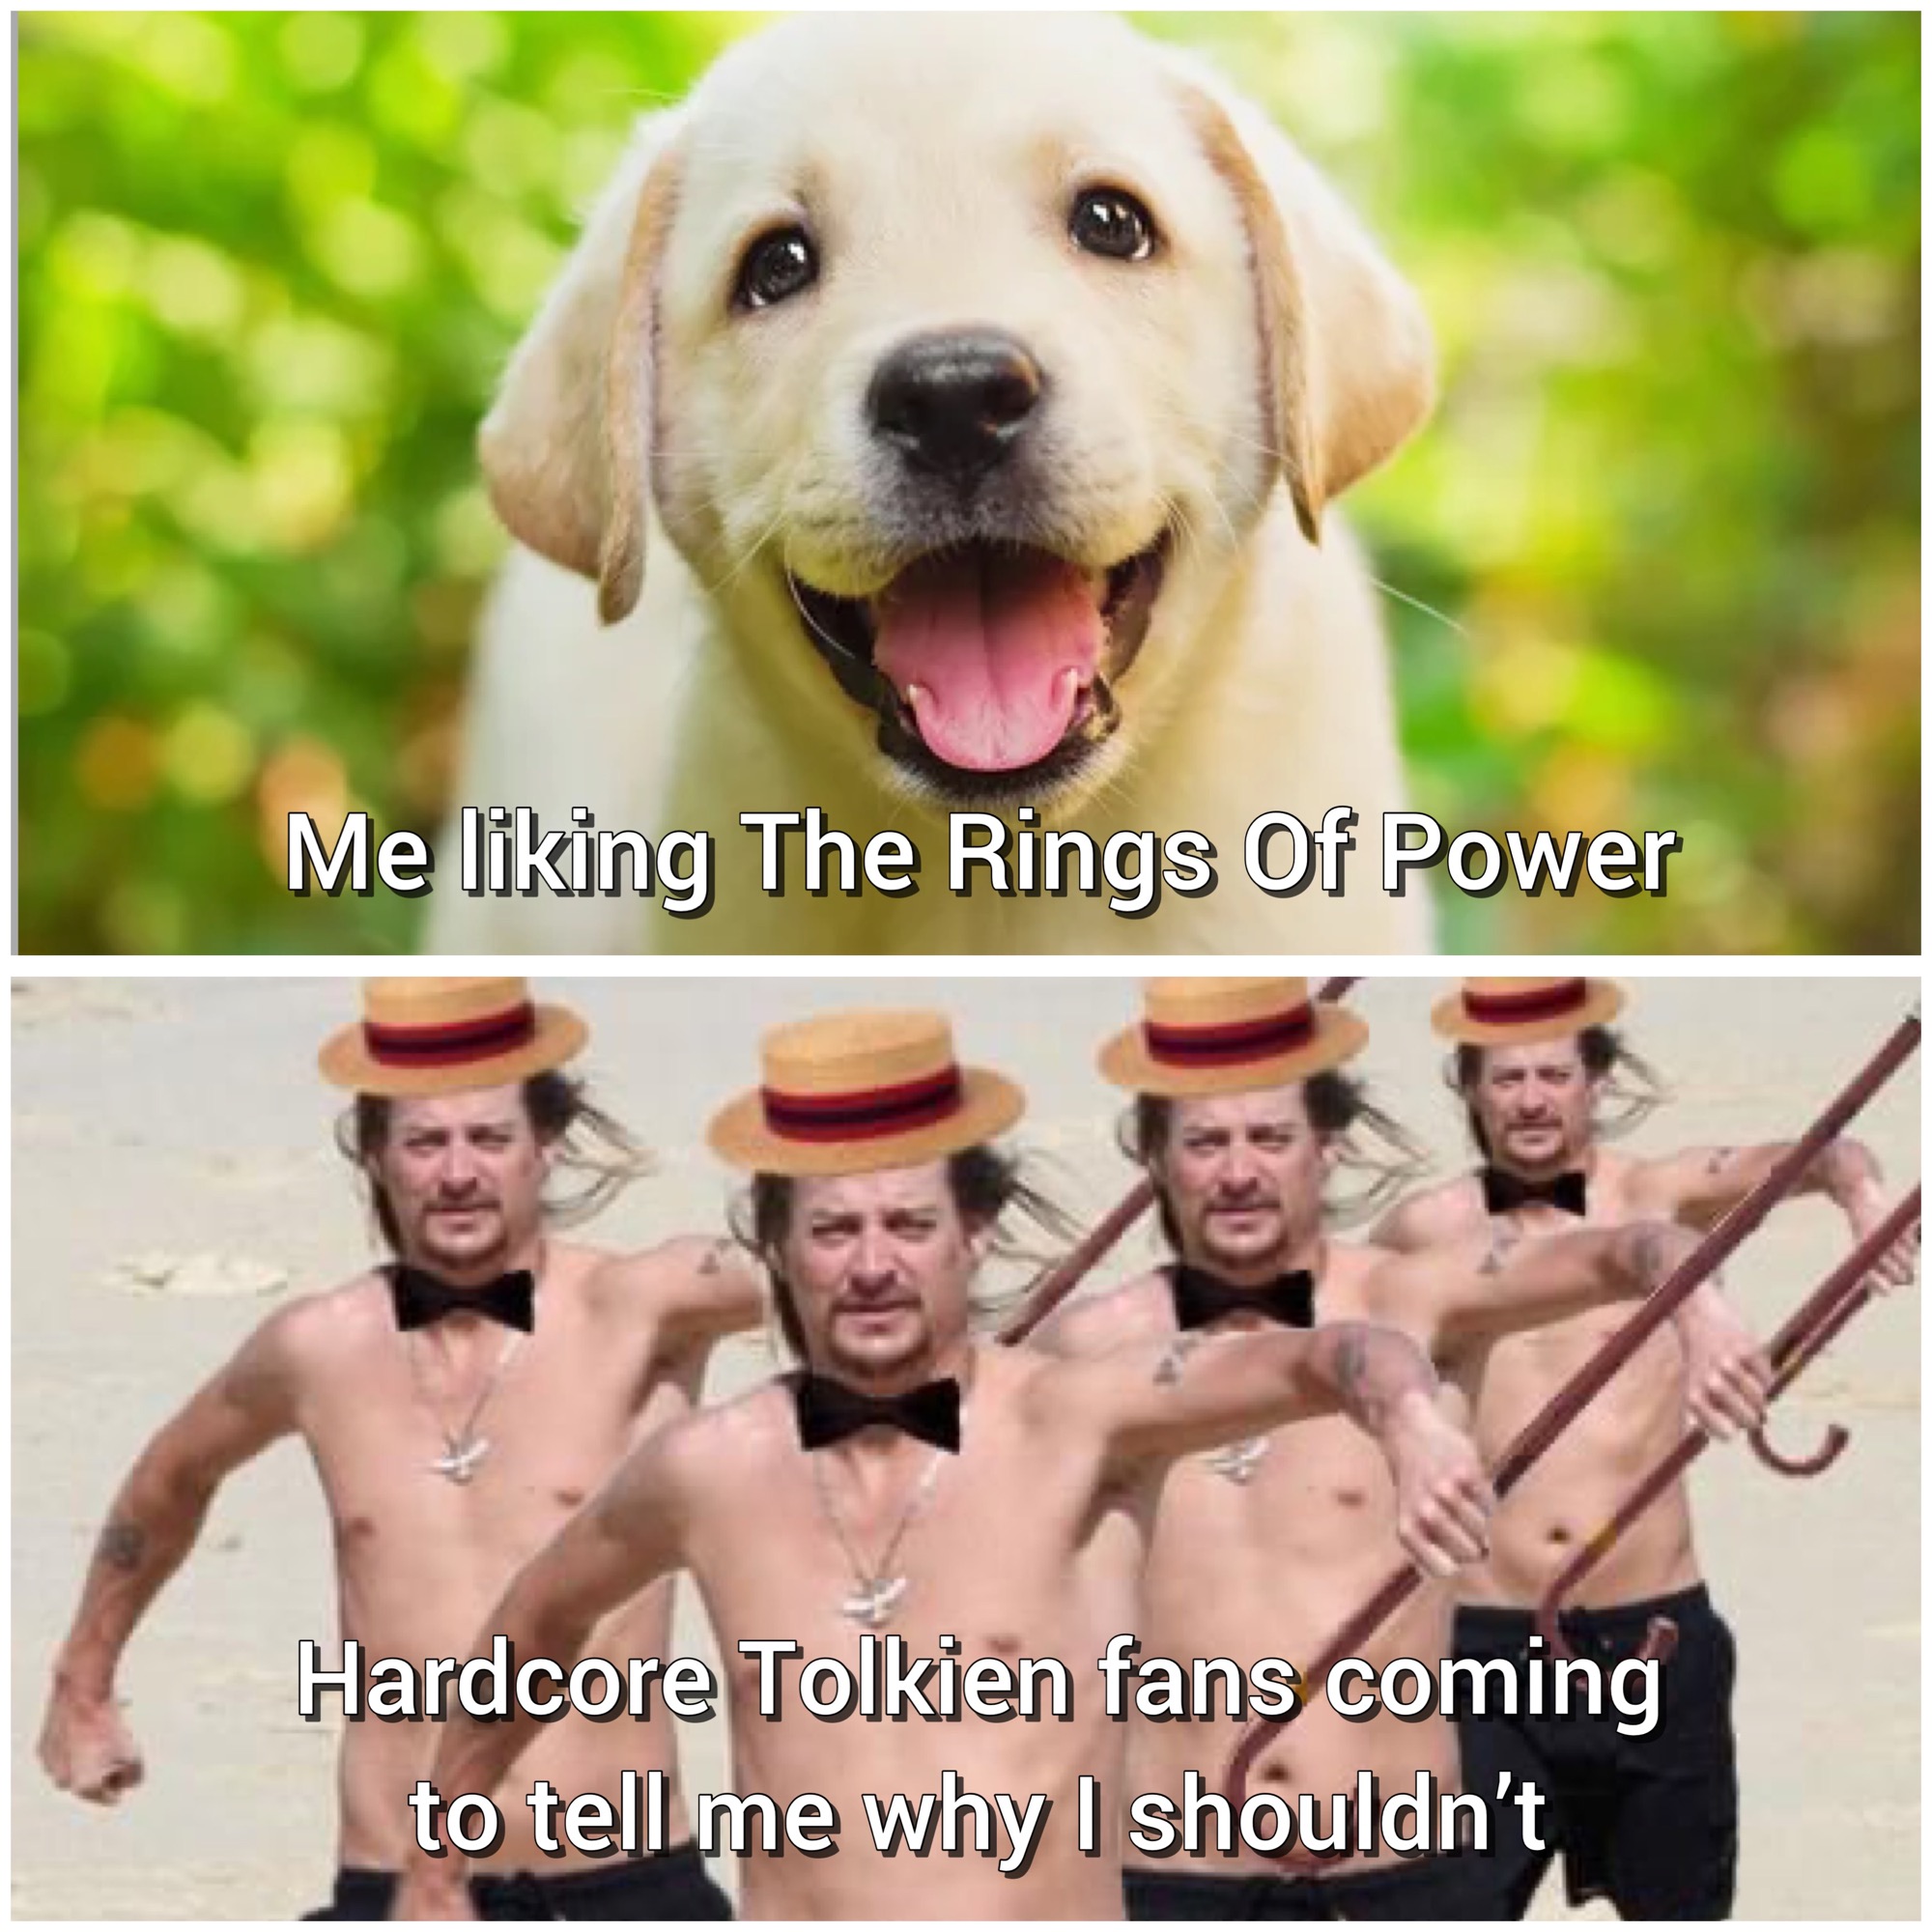 daily dose of pics and memes - labrador puppy dogs - Me liking The Rings Of Power Hardcore Tolkien fans coming to tell me why I shouldn't